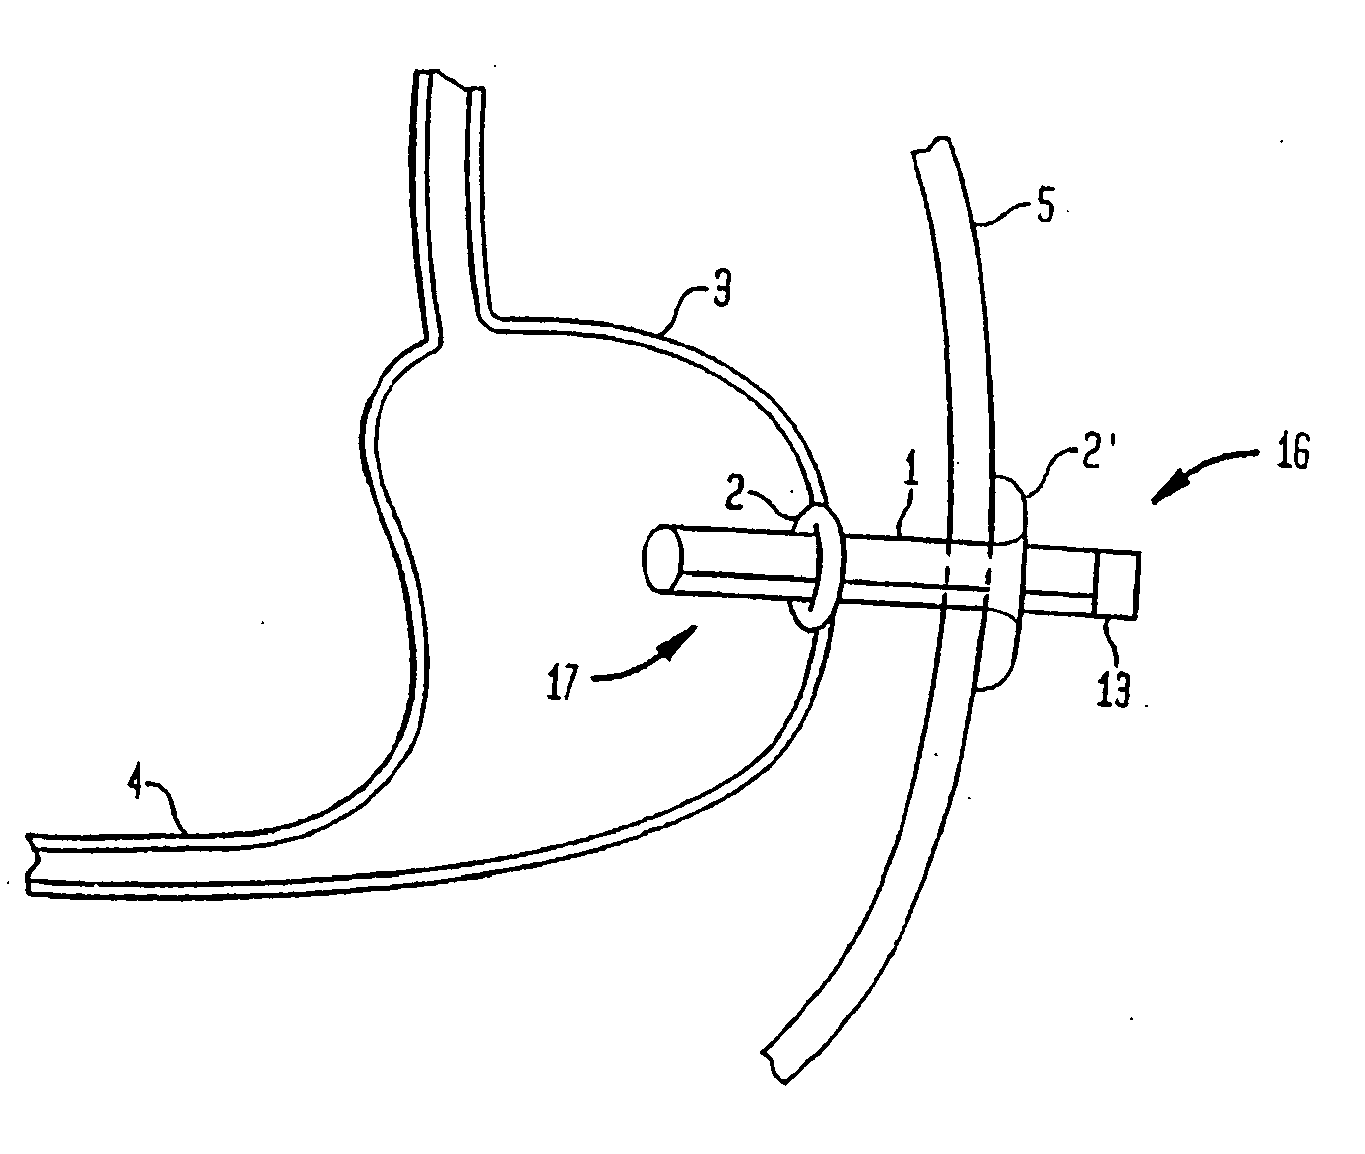 Shunt Apparatus For Treating Obesity By Extracting Food